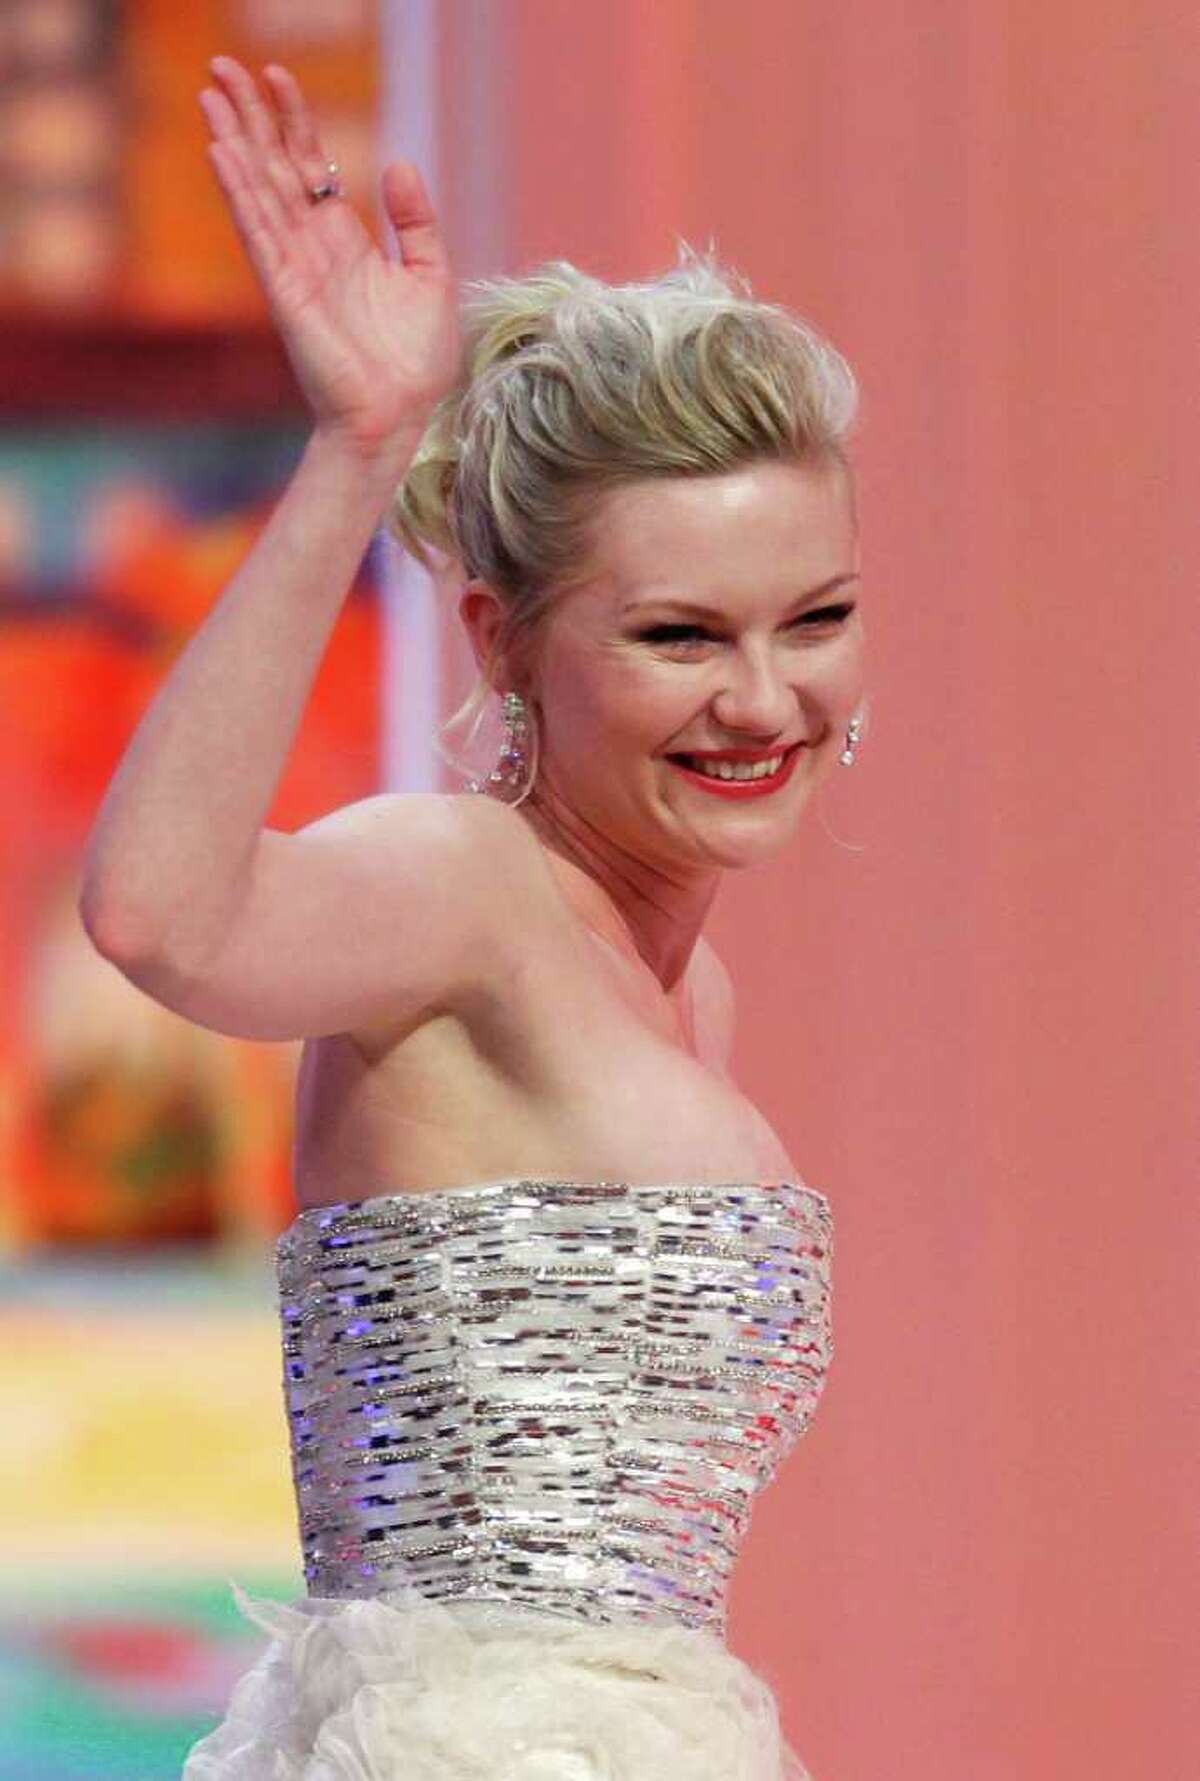 Actress Kirsten Dunst gestures to the crowd as she goes to accept the Best Actress award for the film Melancholia during the awards ceremony at the 64th international film festival, in Cannes, southern France, Sunday, May 22, 2011. (AP Photo/Francois Mori)